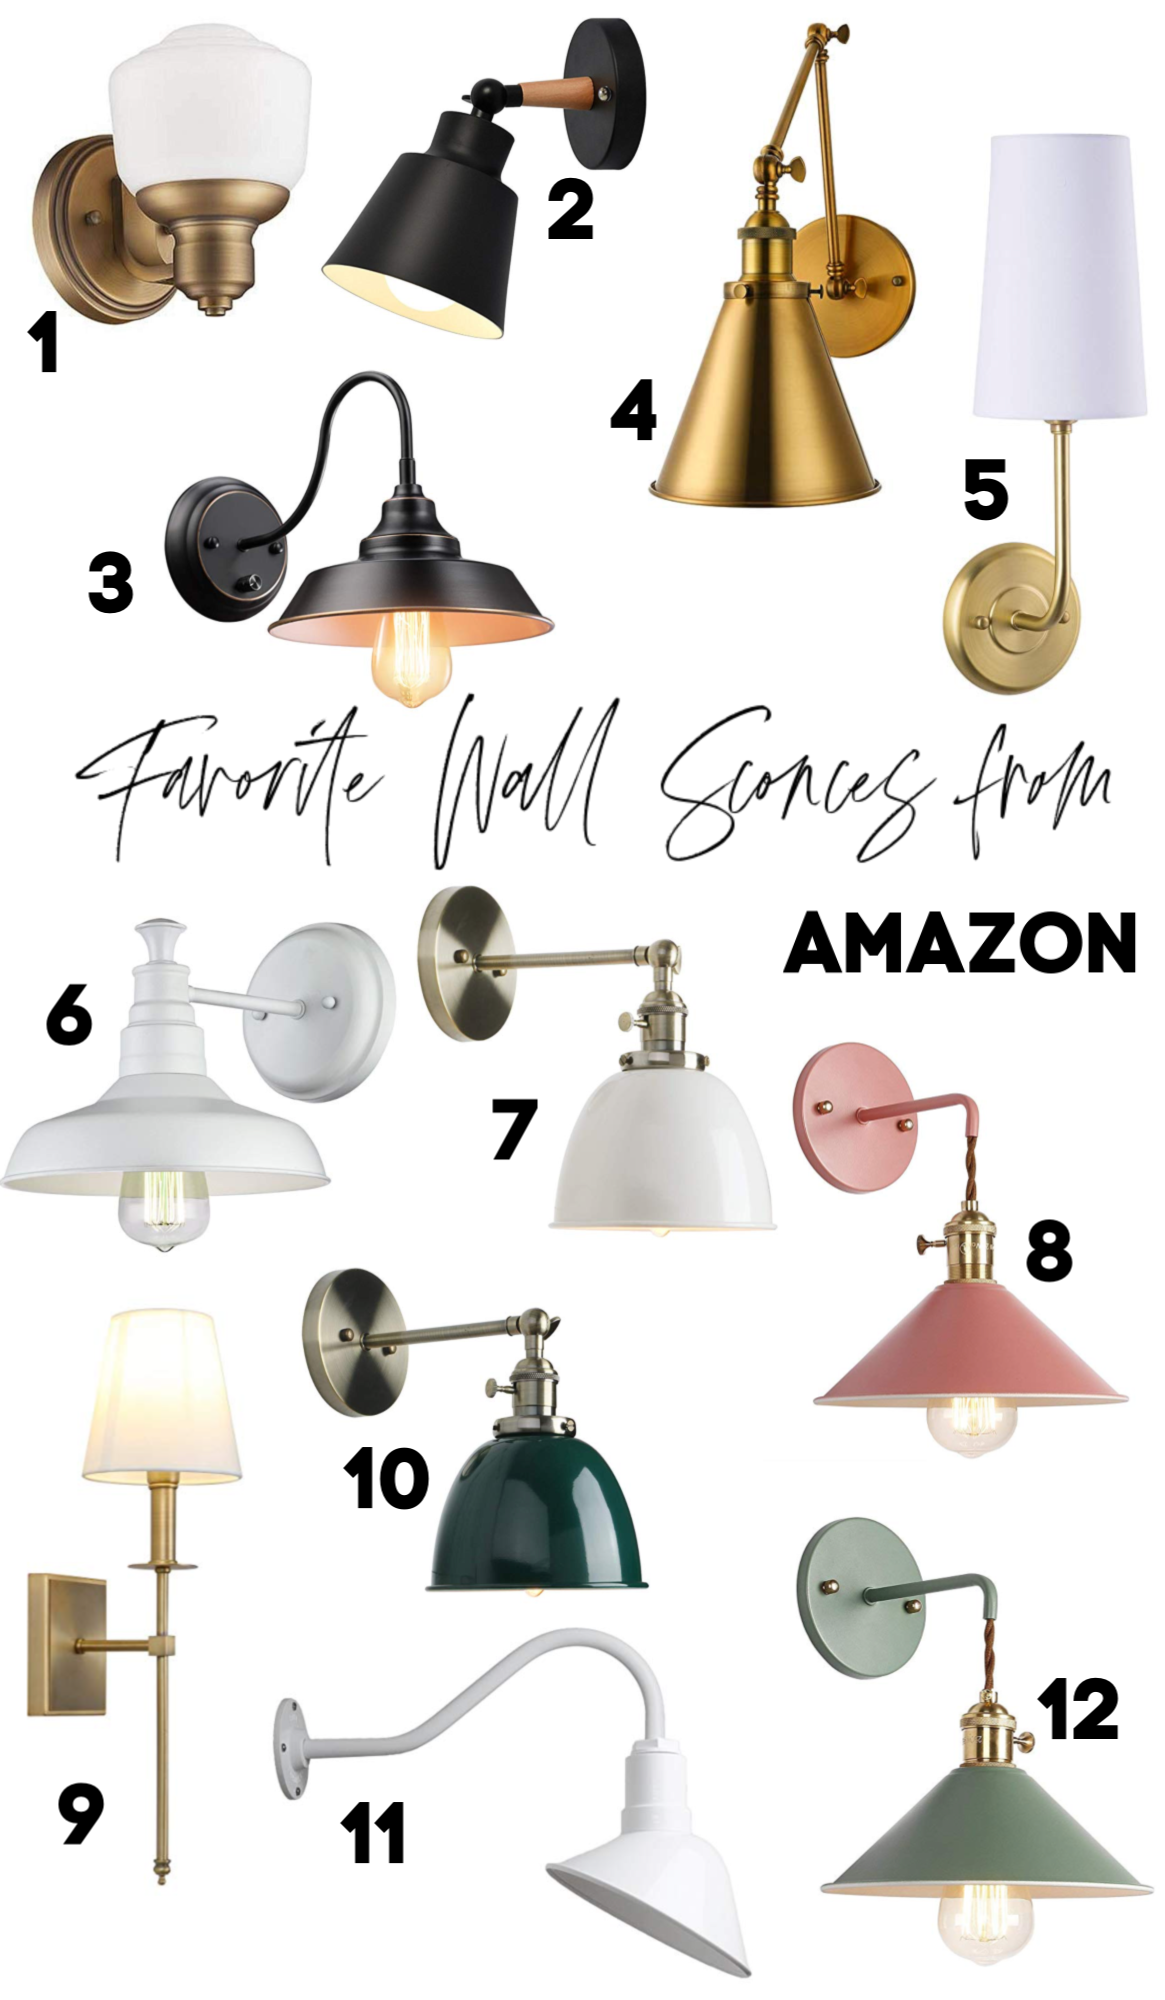 Favorite Wall Sconces from Amazon- Magic Light Trick